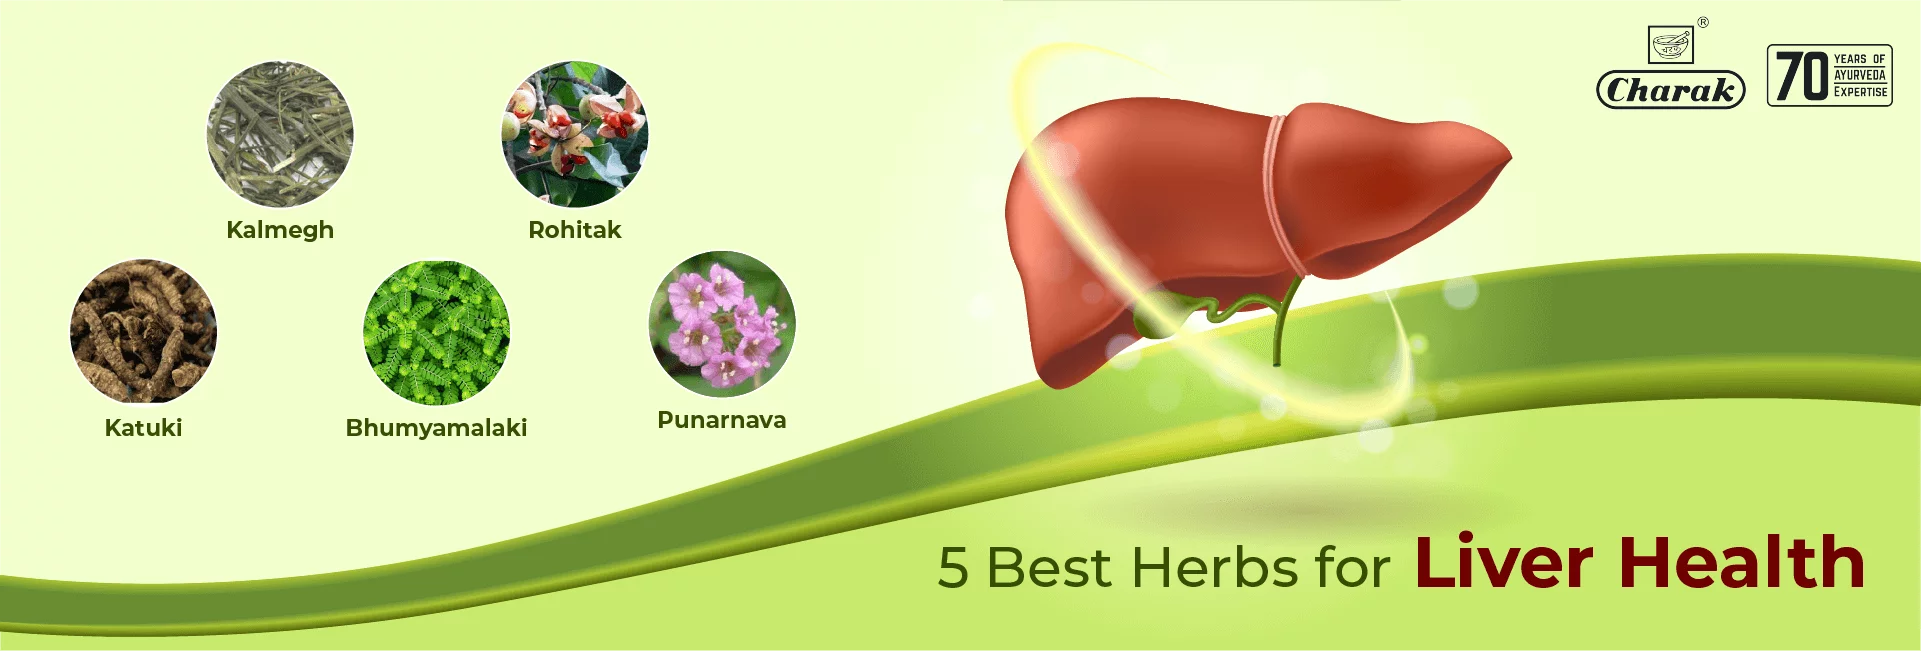 The 10 Best Herbs for Liver Health: Benefits and Precautions